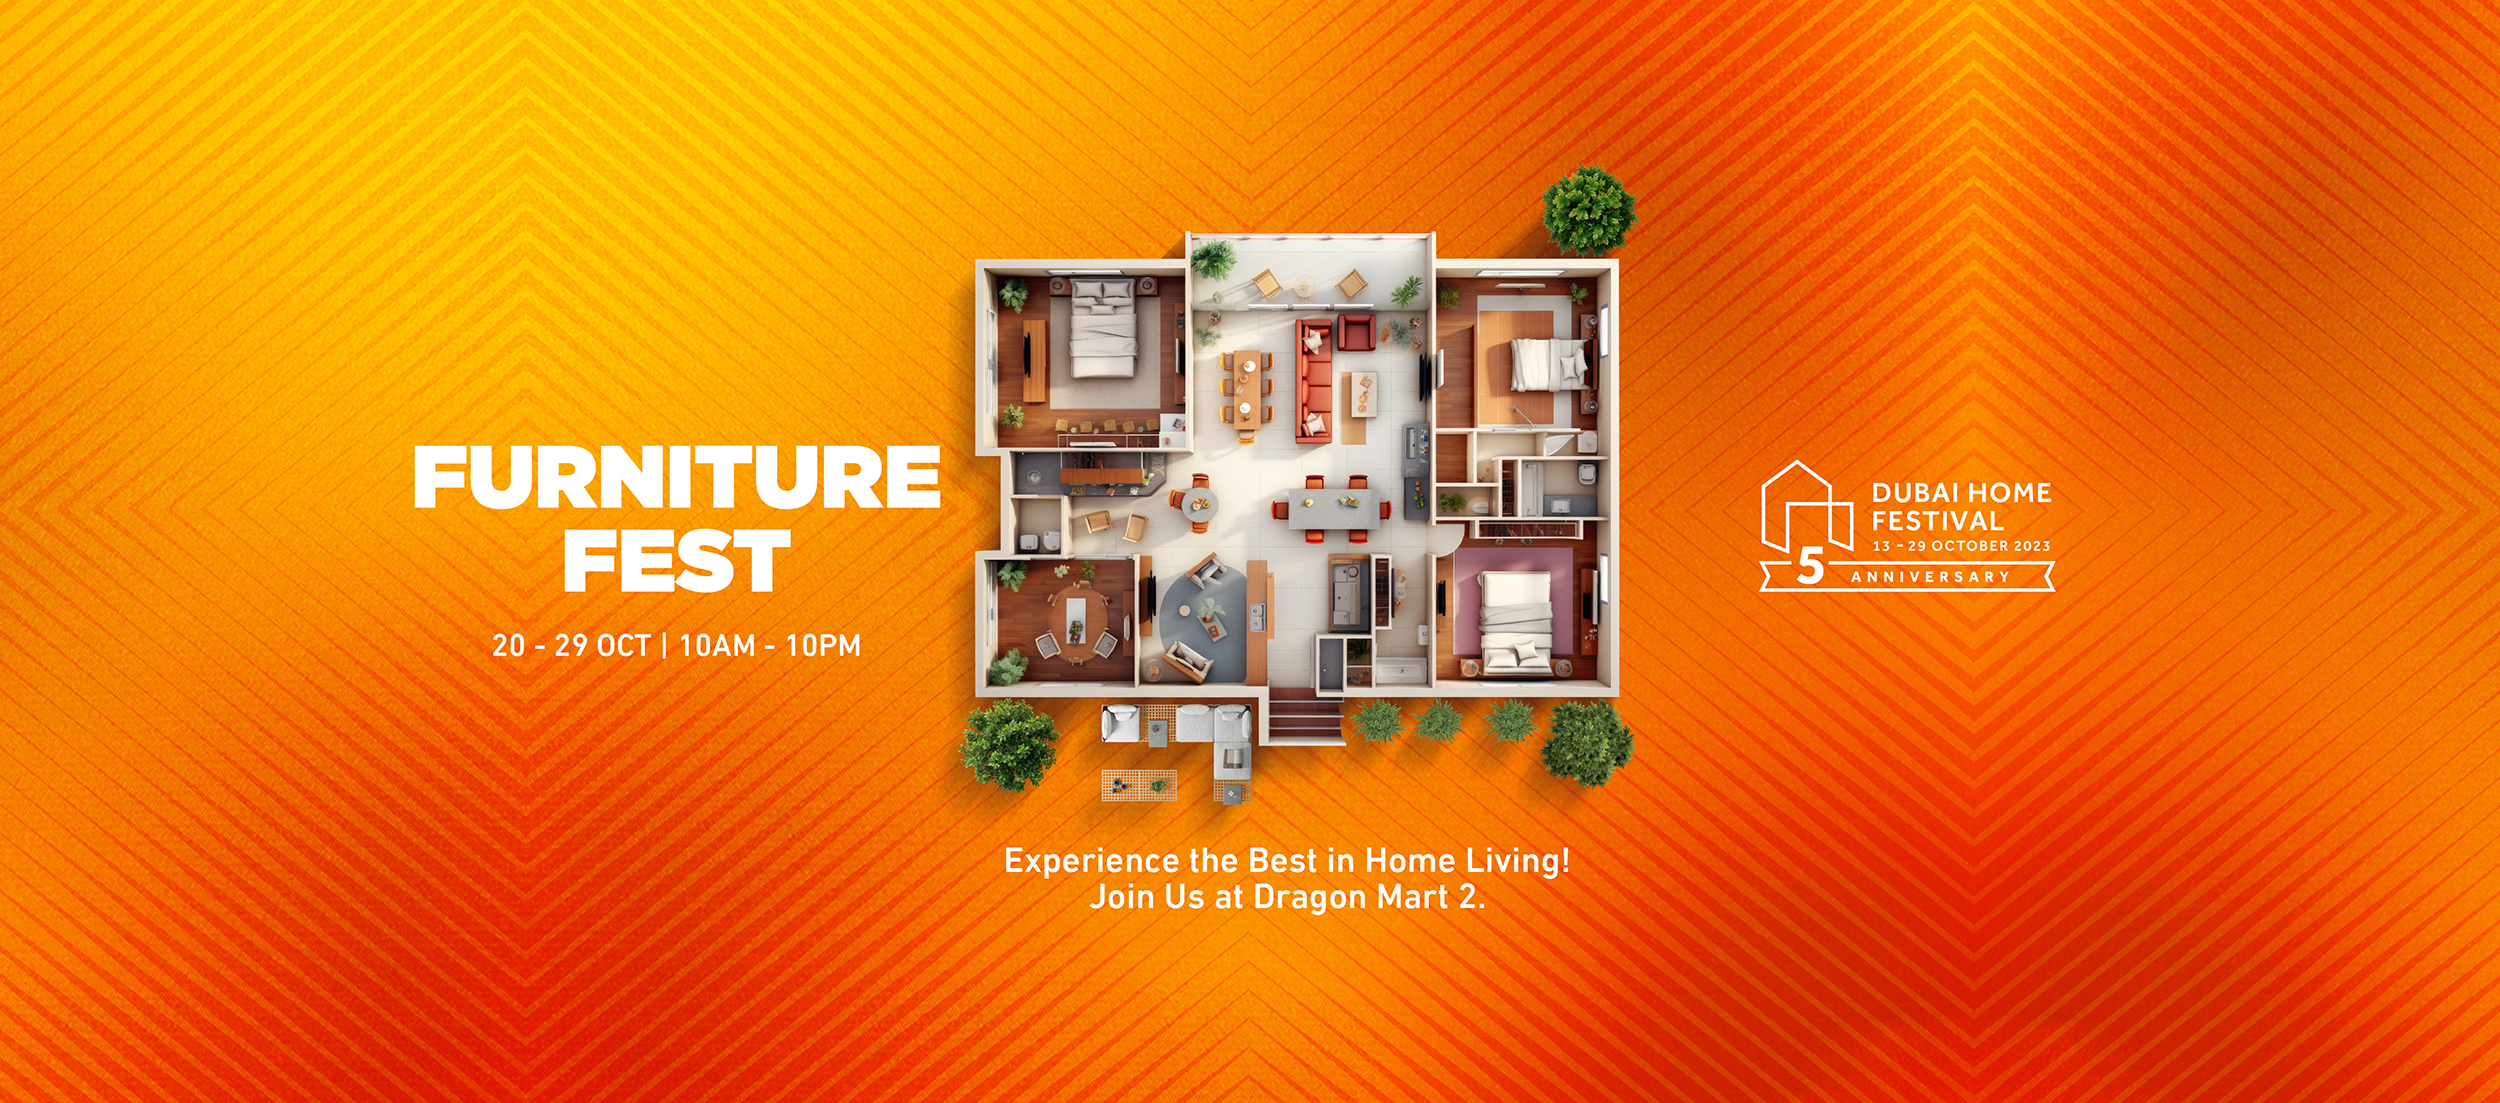 Dragon Mart reveals interior design exhibition and competition during this year’s Dubai Home Festival